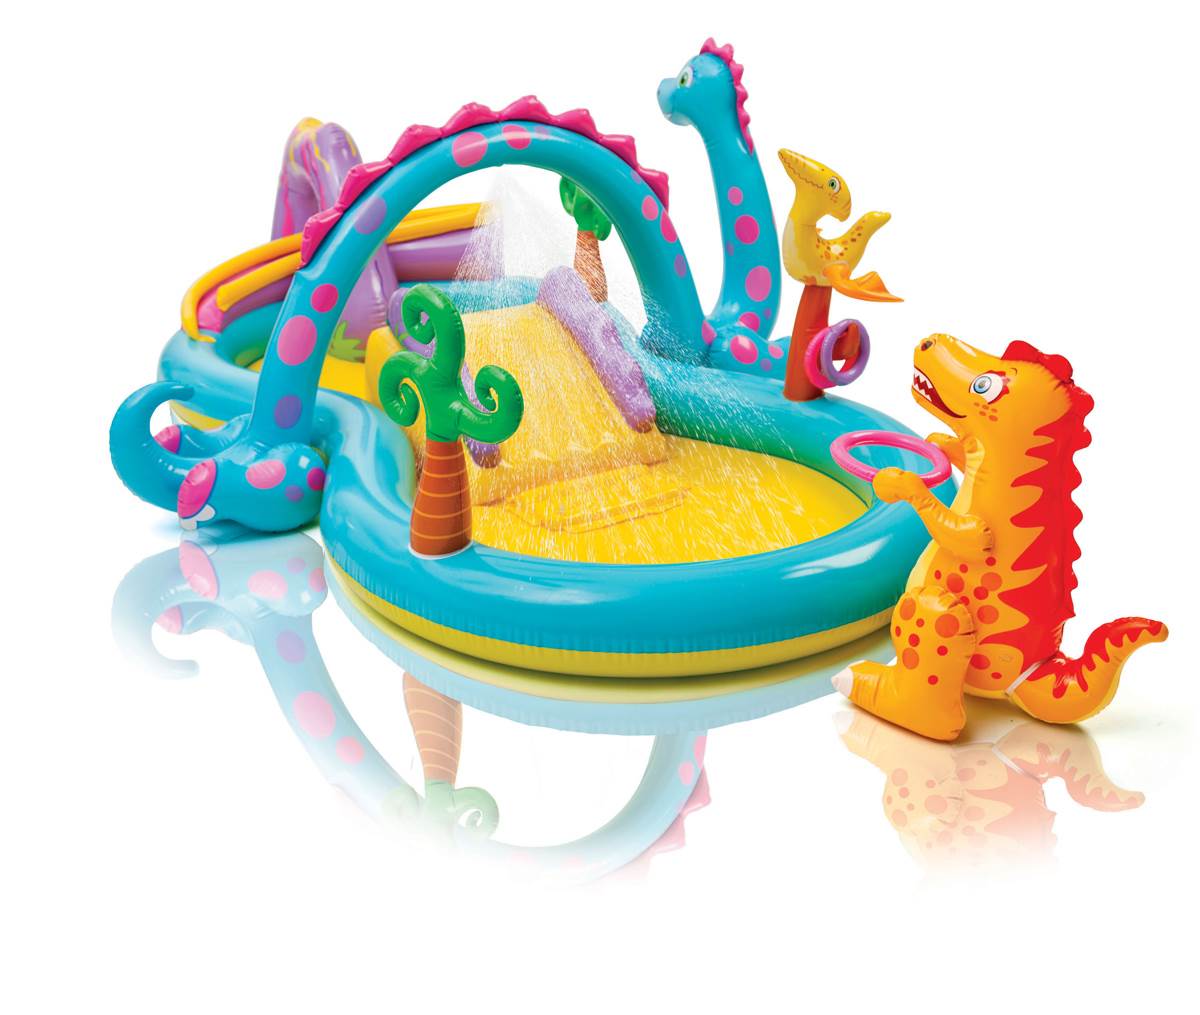 Intex 11ft x 7.5ft x 44in Dinoland Play Center Kiddie Inflatable Swimming Pool - image 1 of 6